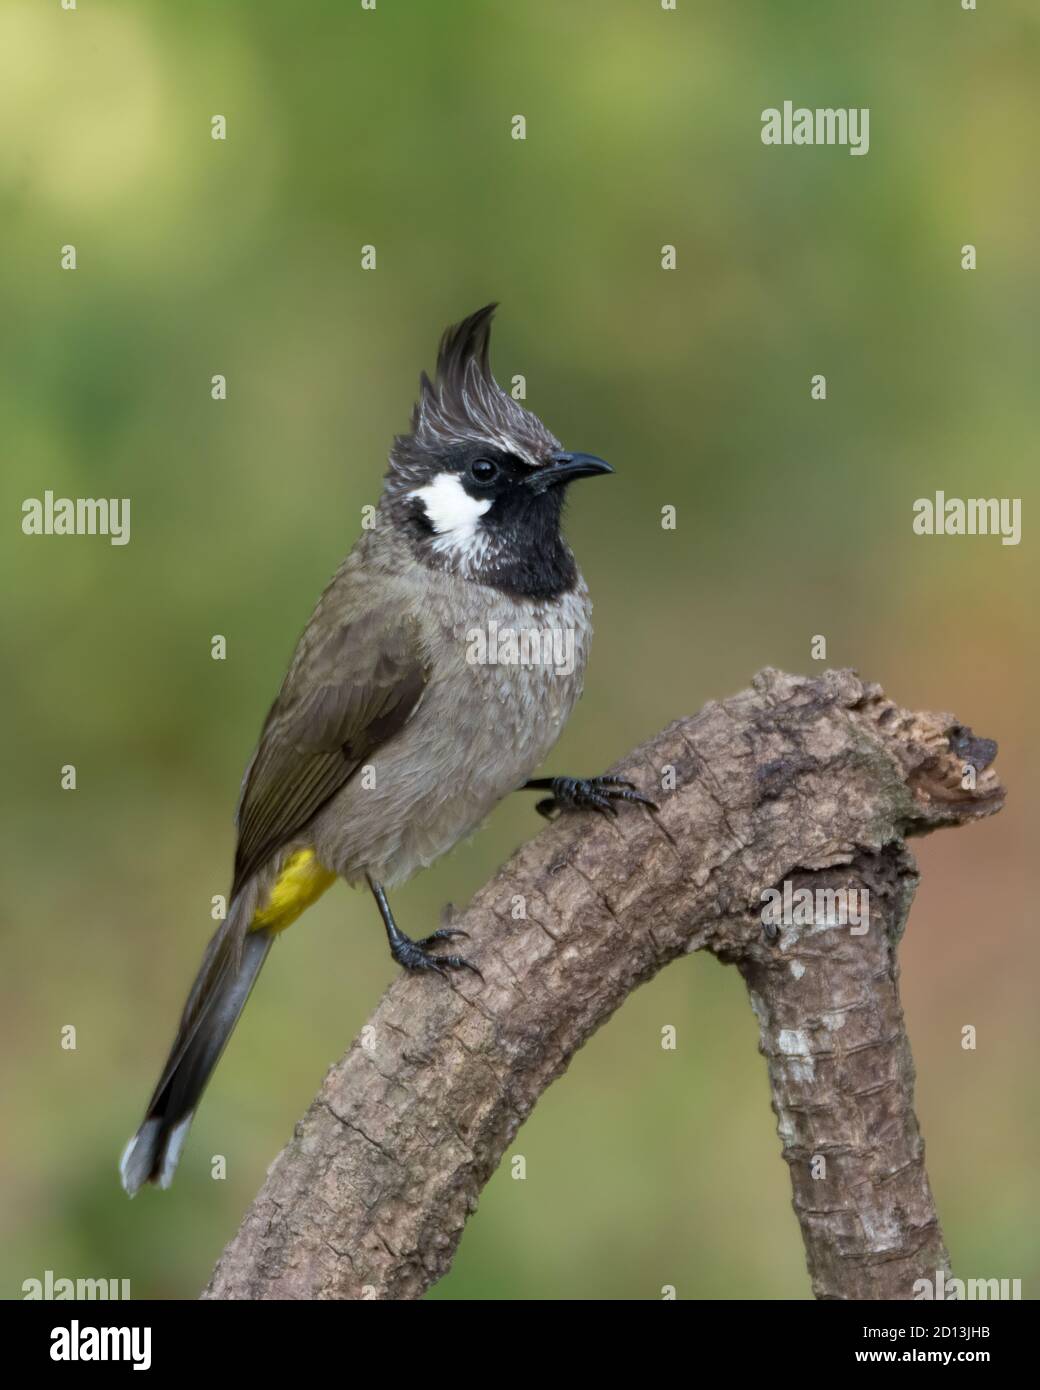 A Himalayan Bulbul (Pycnonotus leucogenys), also called the White-cheeked Bulbul, perched on a branch in the forests of Sattal in Uttarakhand, India. Stock Photo